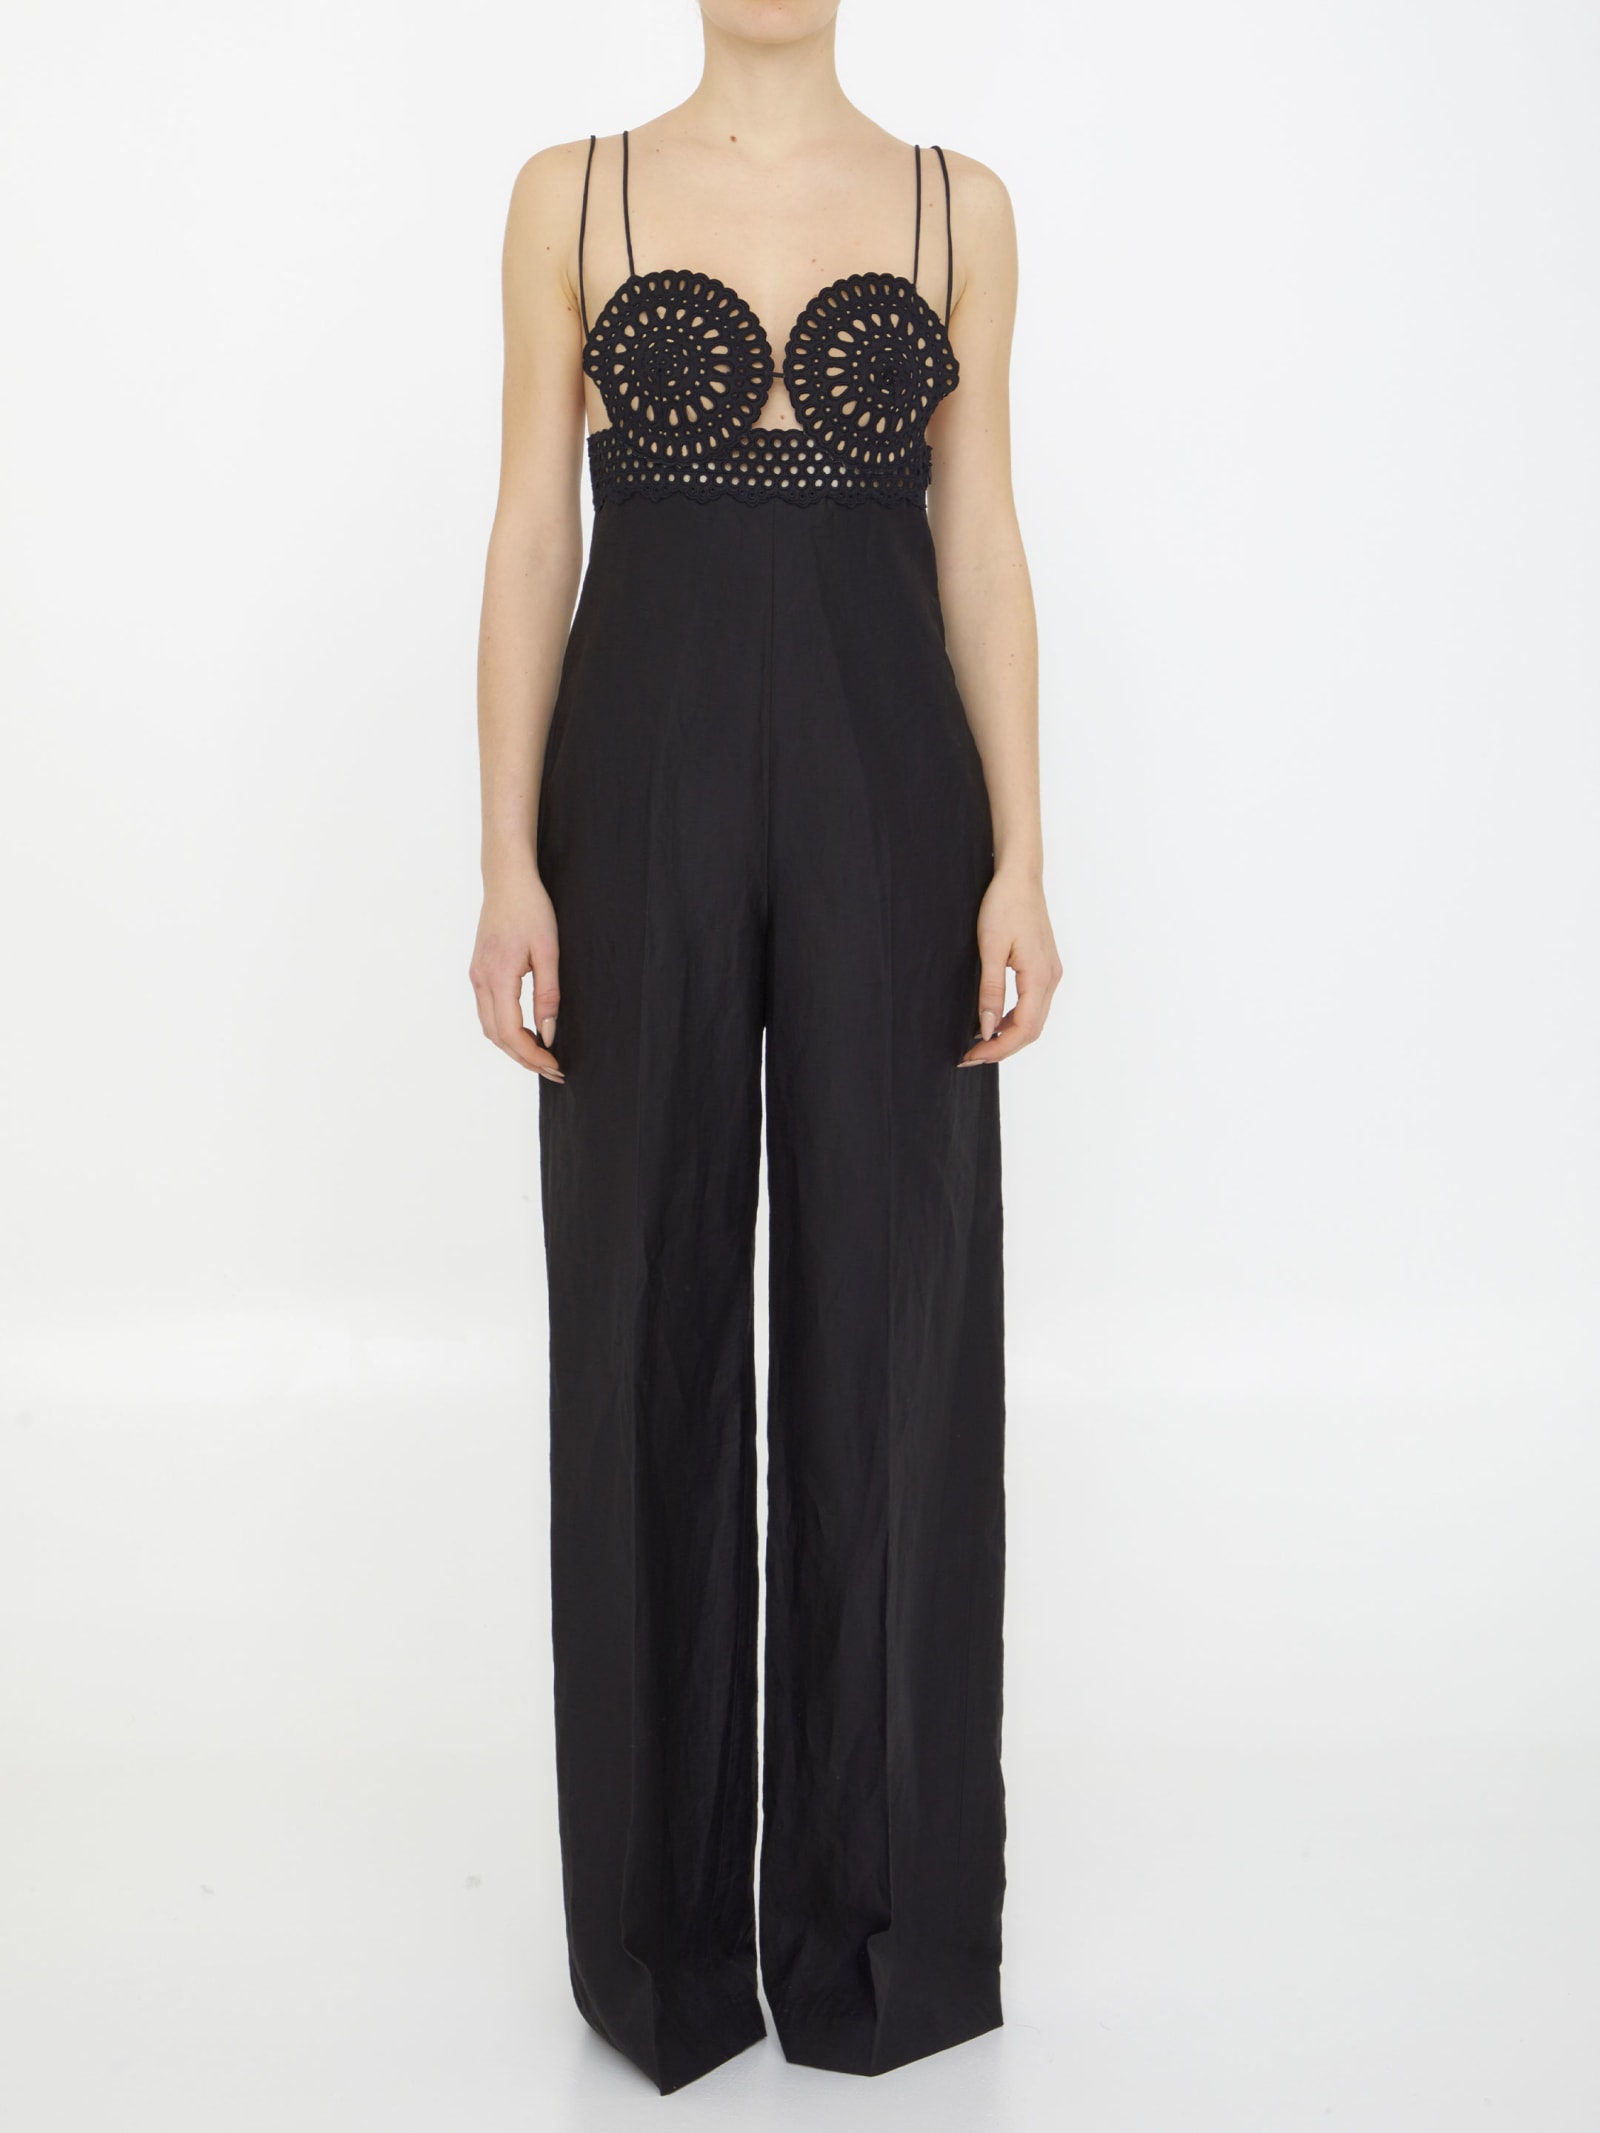 Stella McCartney Broderie Anglaise Bustier Jumpsuit